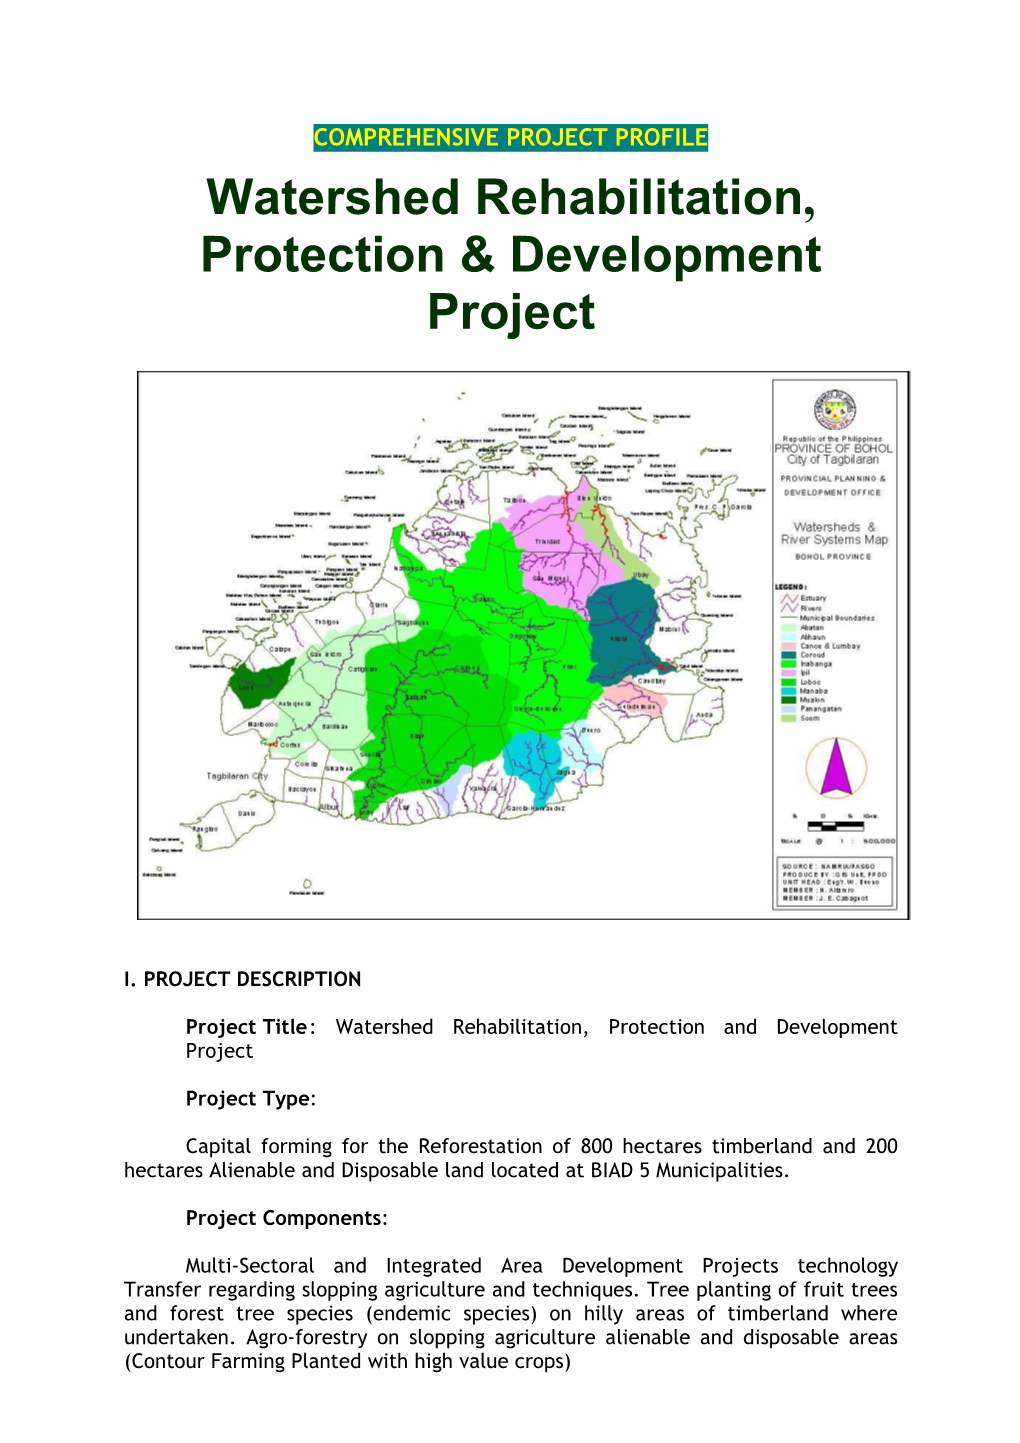 Watershed Rehabilitation, Protection and Development Project